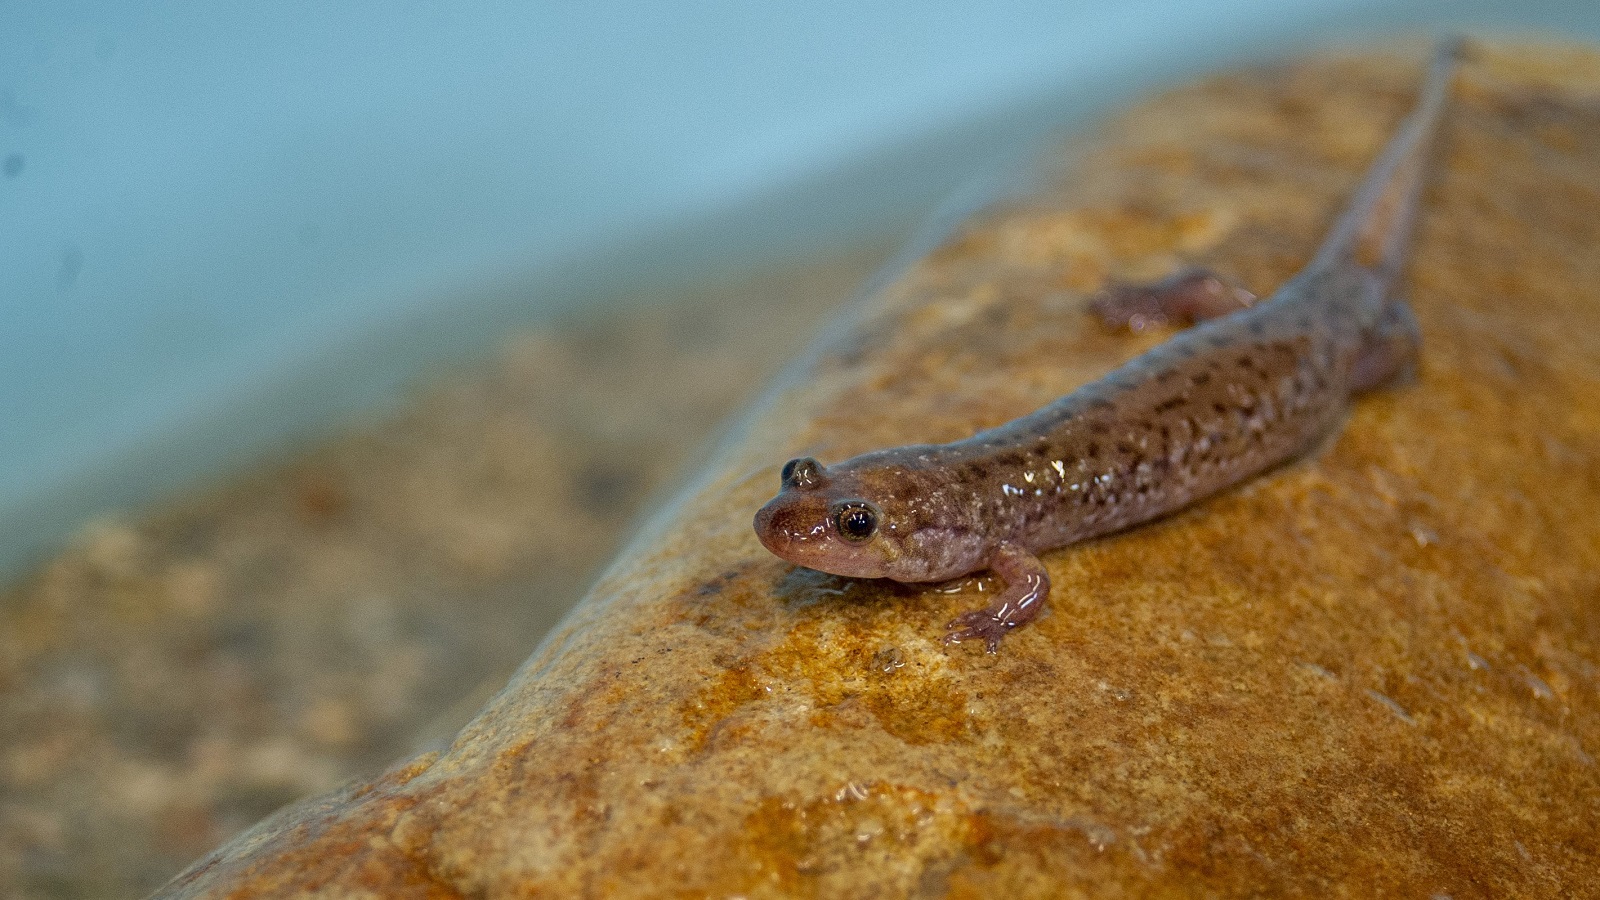 A Seal Salamander rests on a rock in an artificial stream system at the Tennessee Aquarium Conservation Institute.